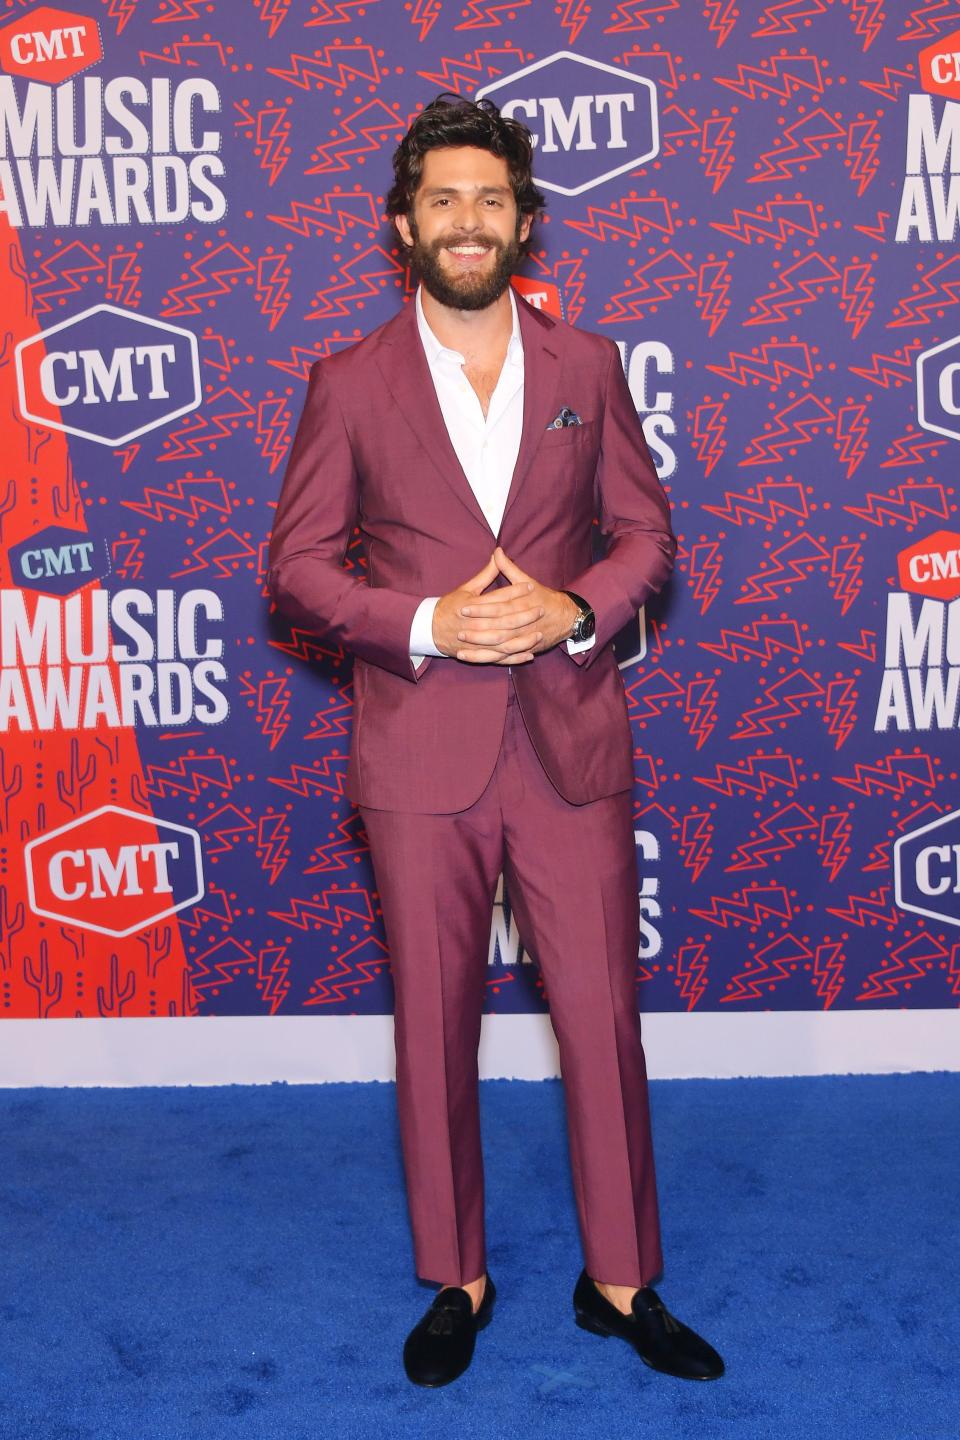 The Best Beards on the 2019 CMT Music Awards Red Carpet